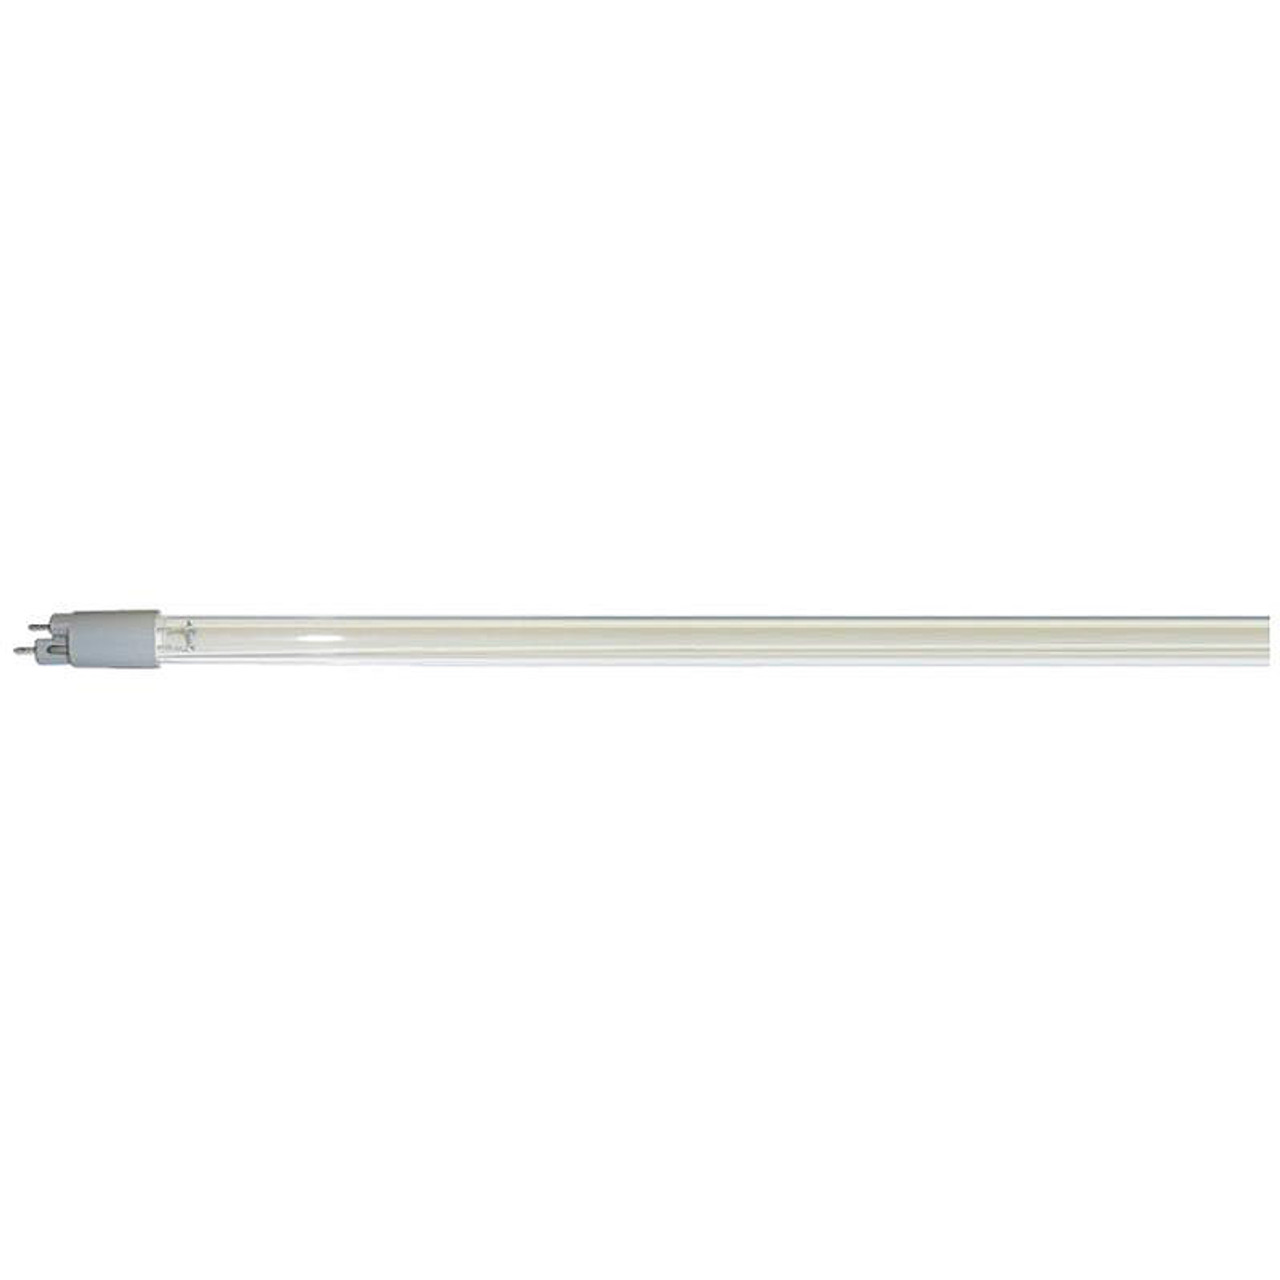 Sterilight S410RL-HO High Output Replacement UV Lamp